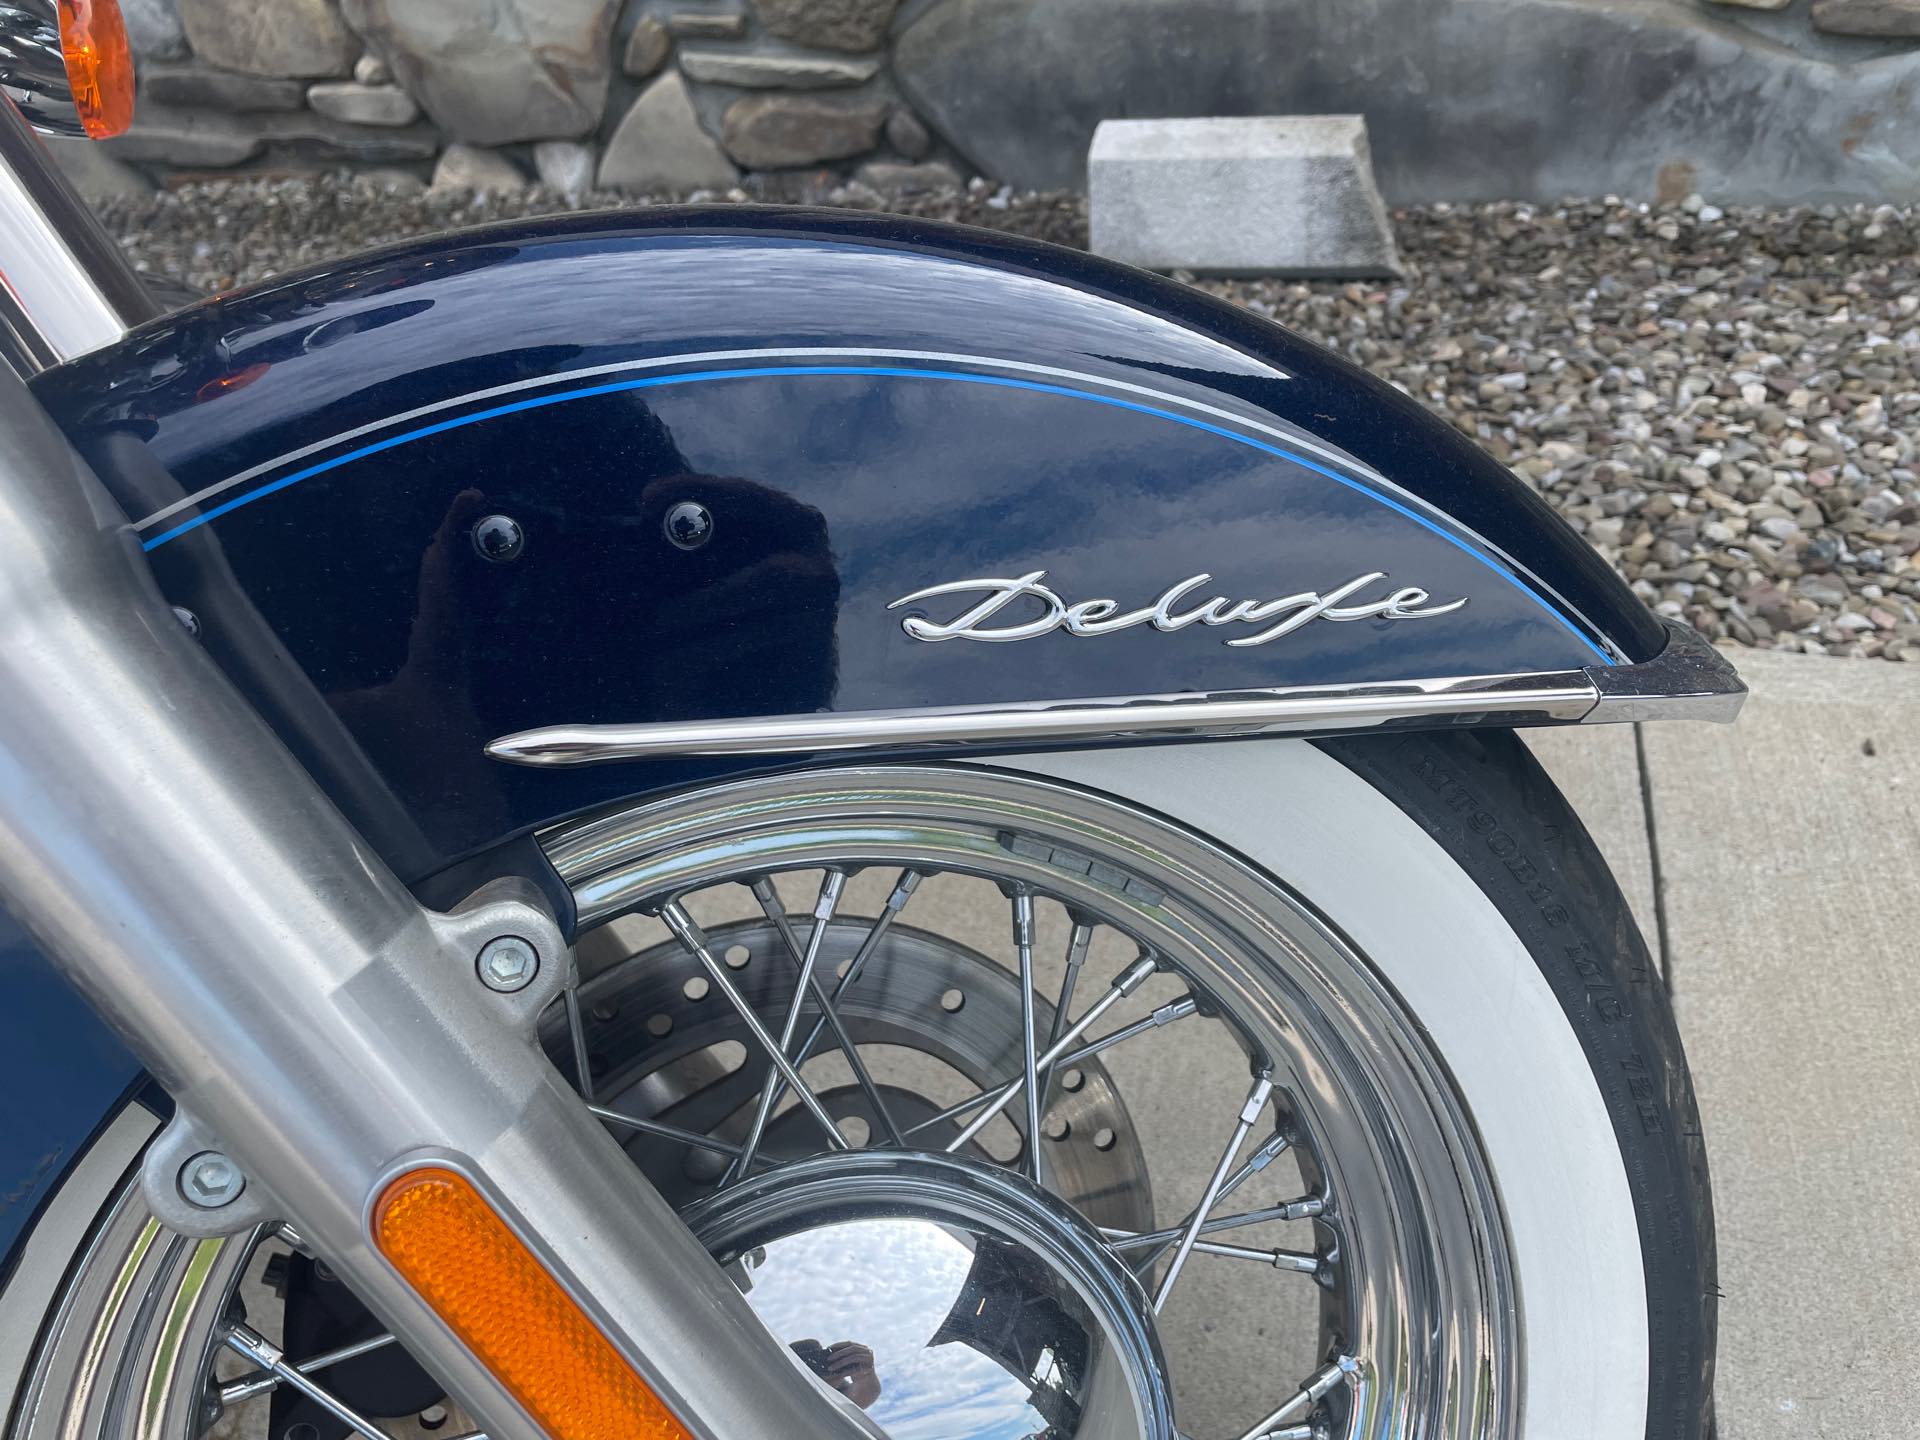 2014 Harley-Davidson Softail Deluxe at Arkport Cycles